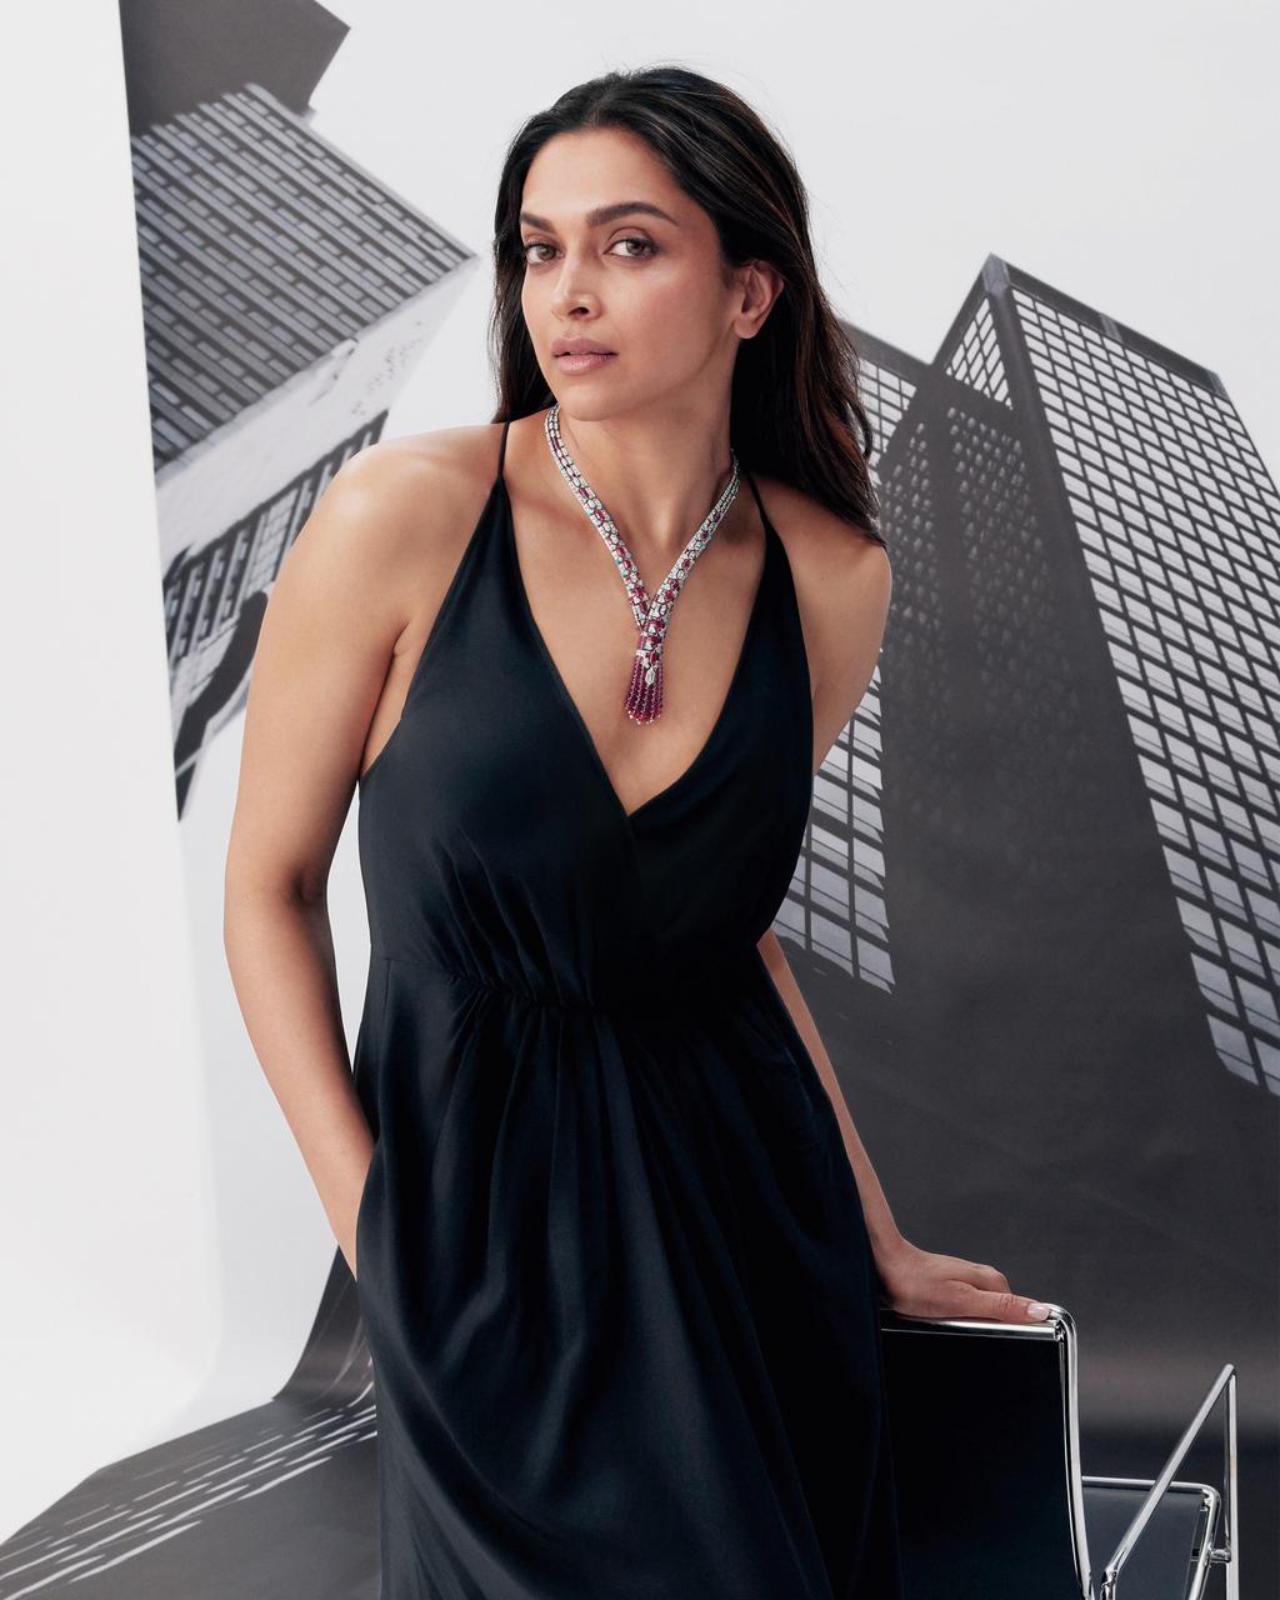 With muted make-up, Deepika Padukone goes minimalistic allowing the bespoke necklace to shine through